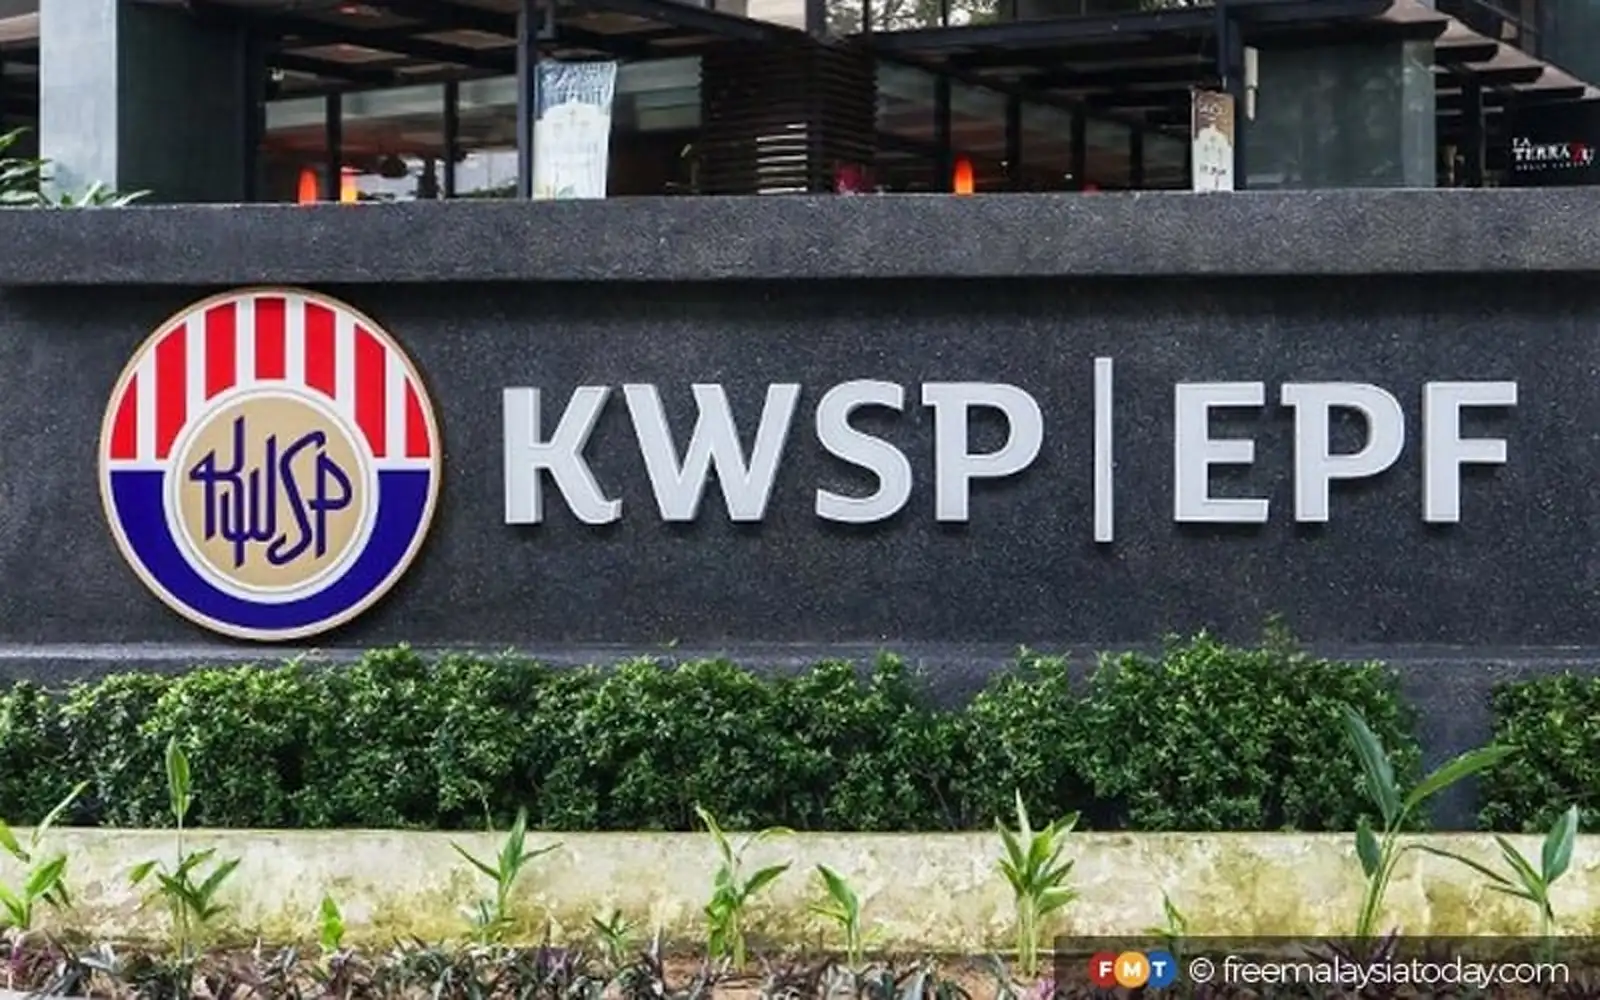 malaysians laud introduction of third flexible epf account